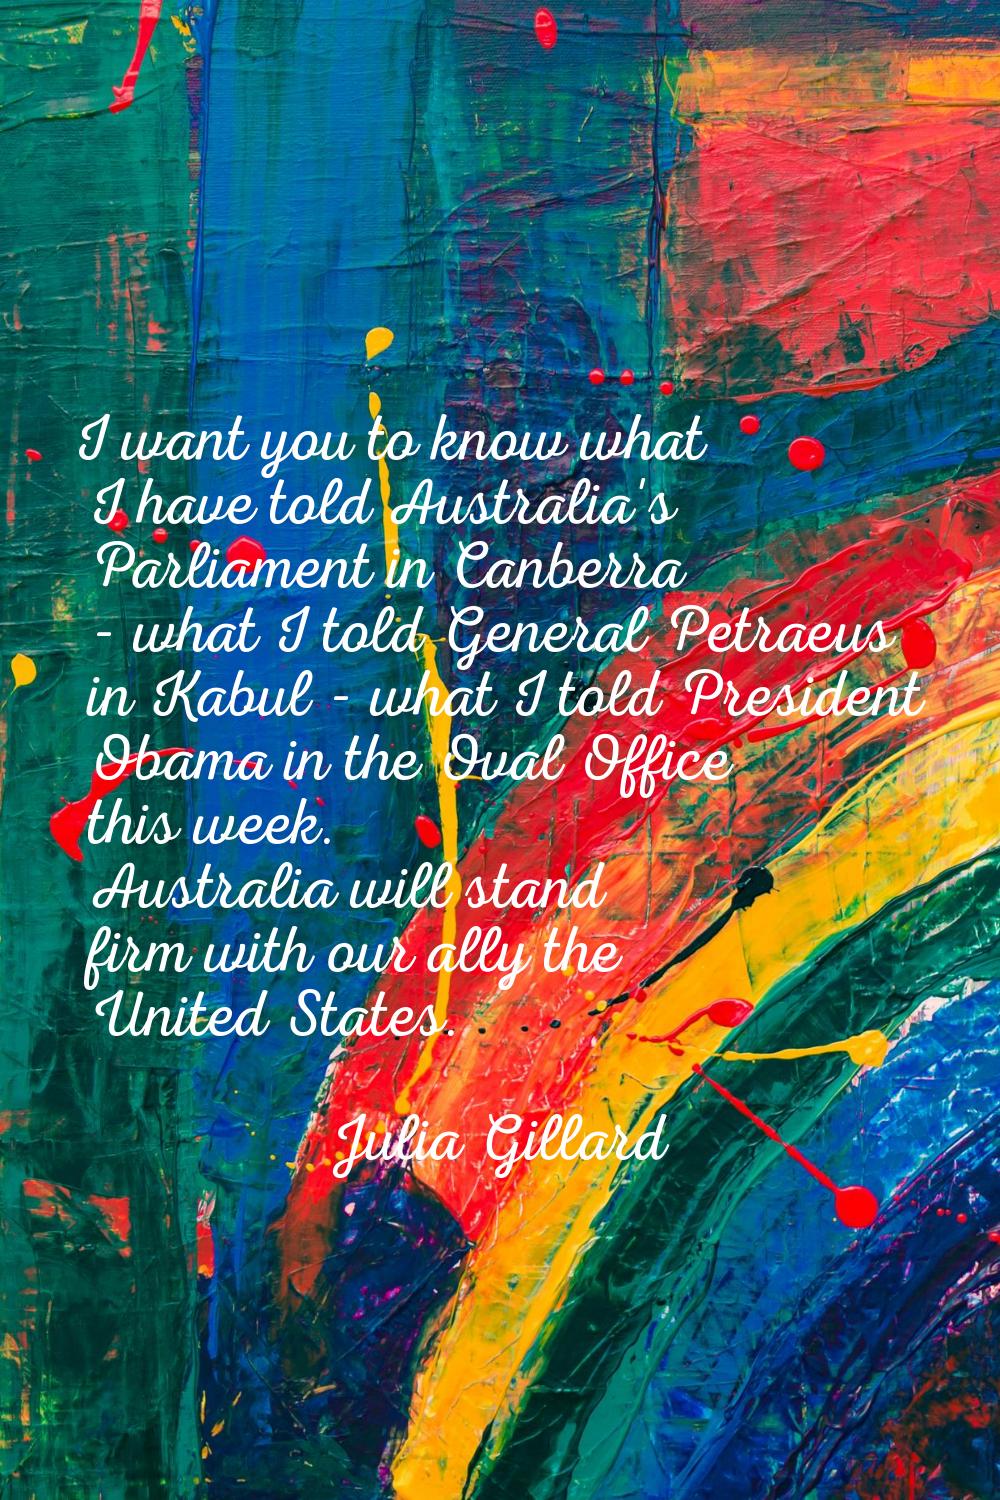 I want you to know what I have told Australia's Parliament in Canberra - what I told General Petrae